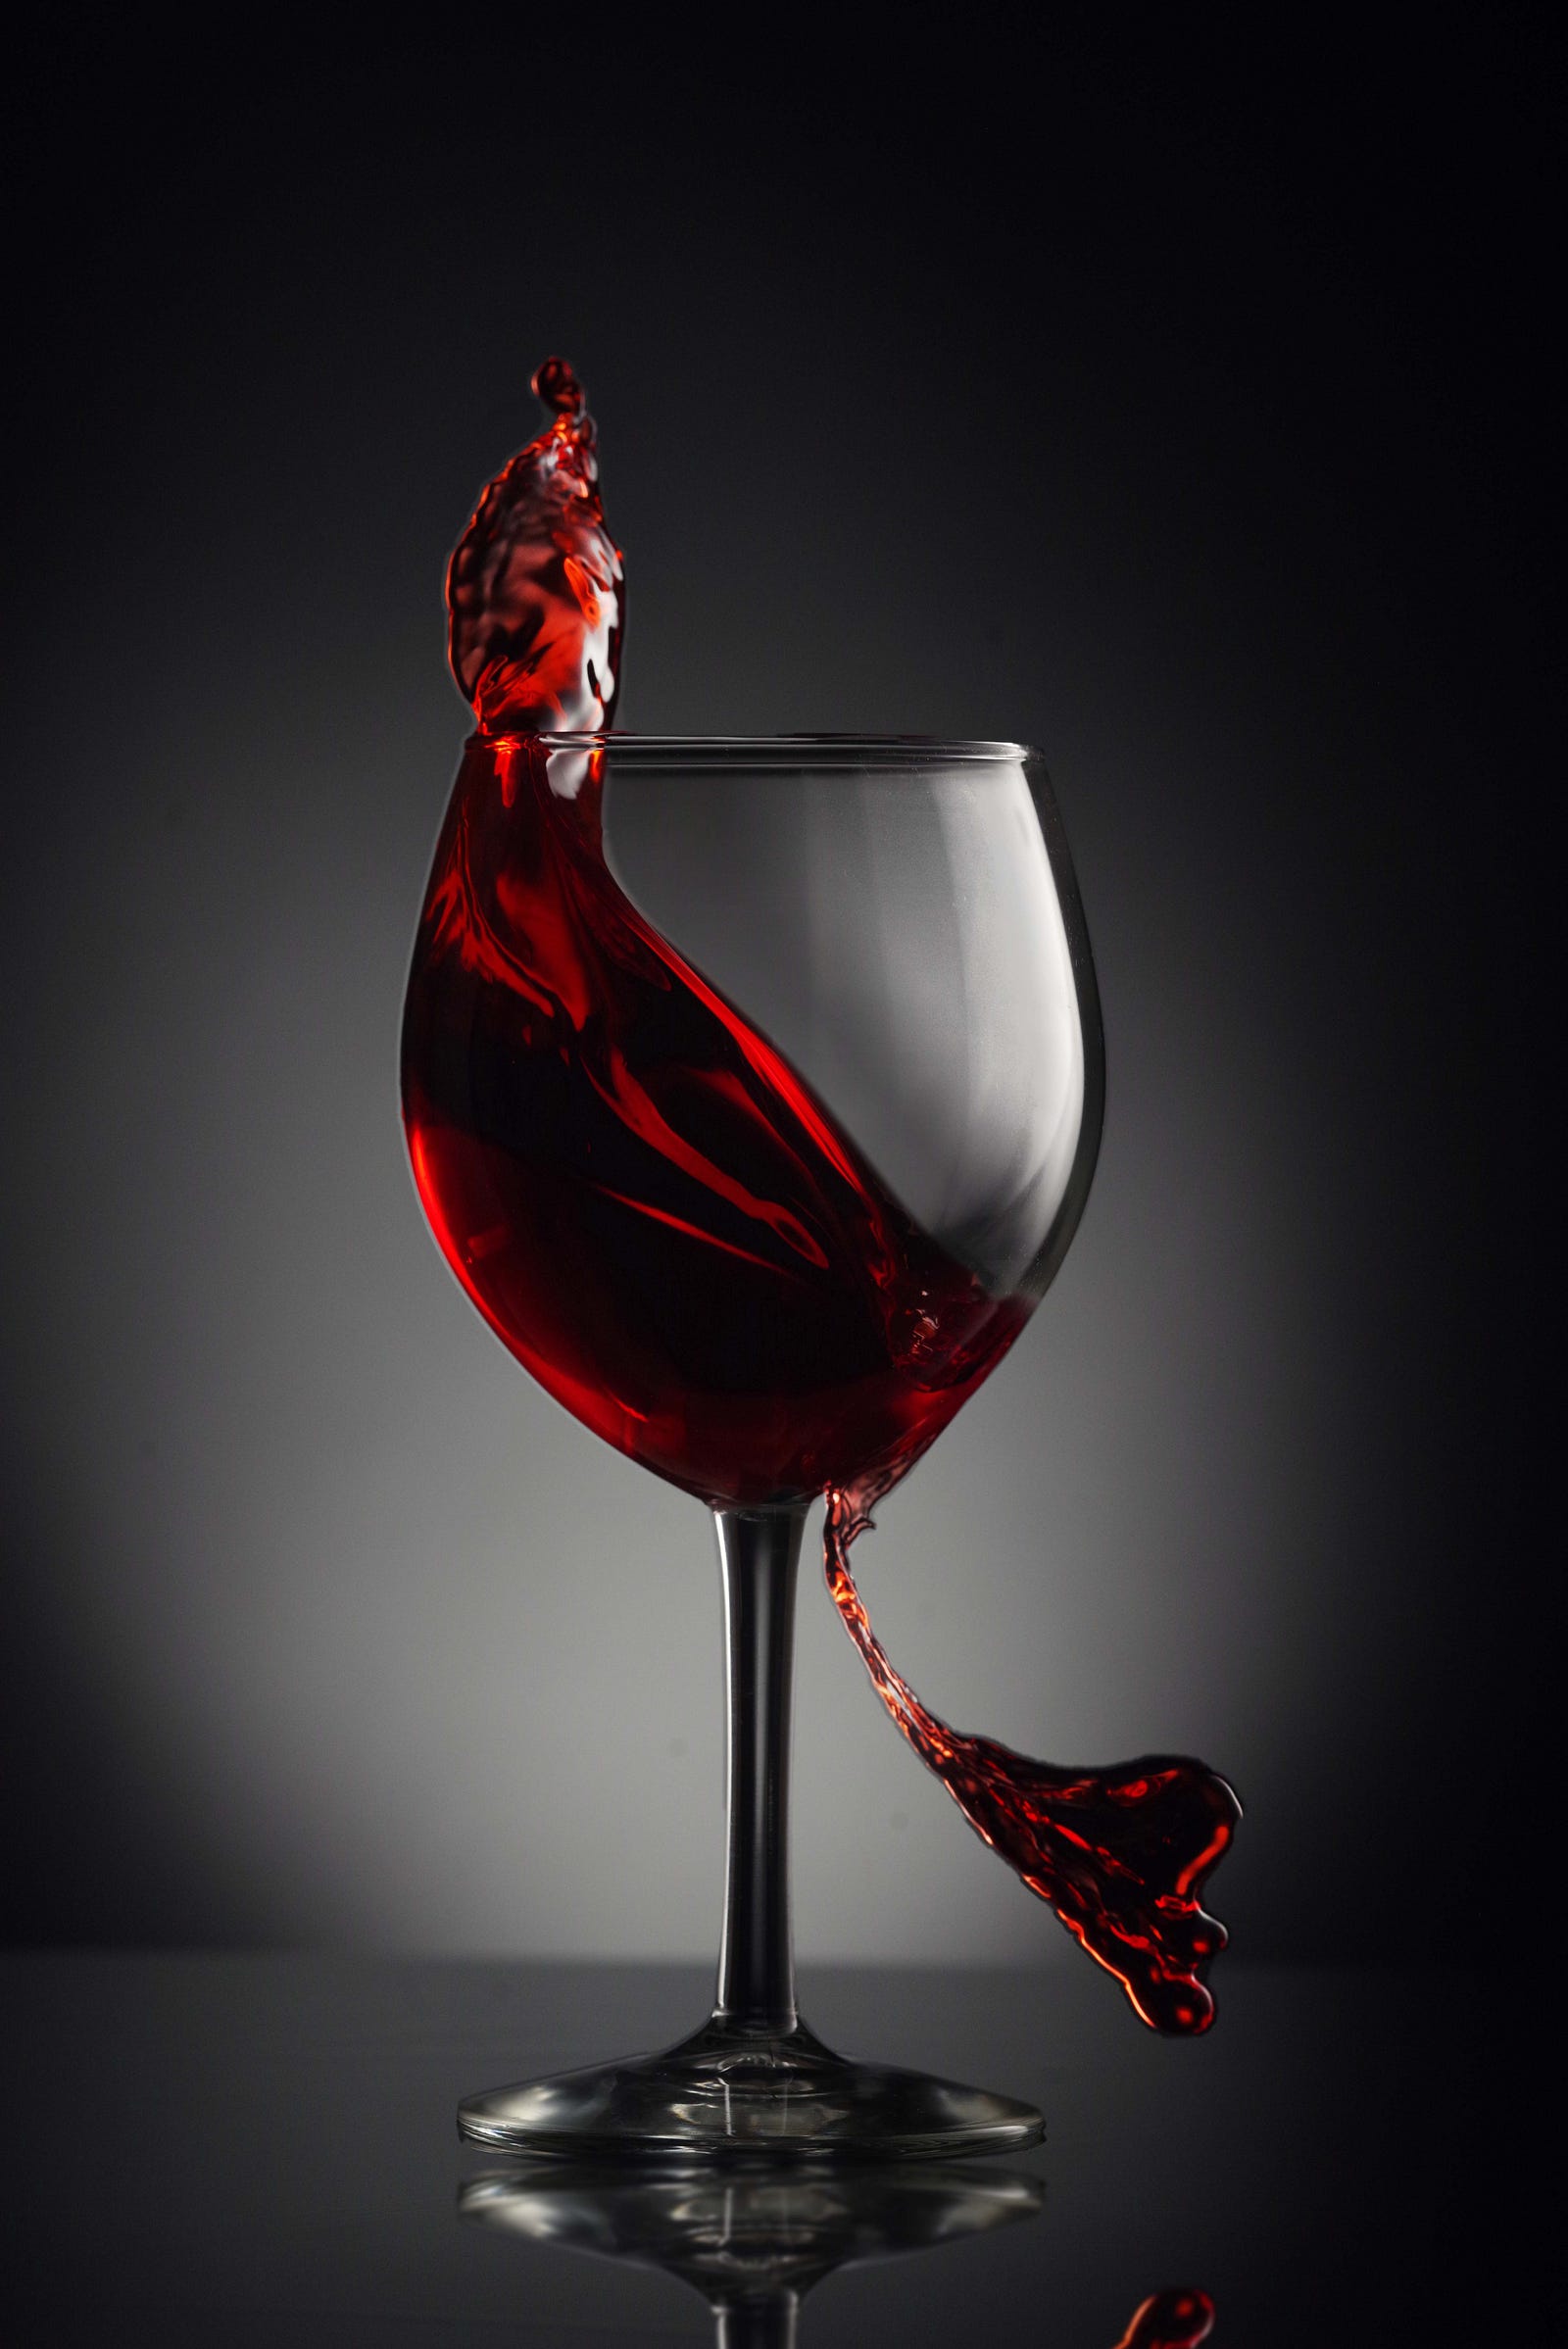 Red wine splashes out of a glass as it is poured in from above. Moderation might be a key to reaping the alleged health benefits of red wine.